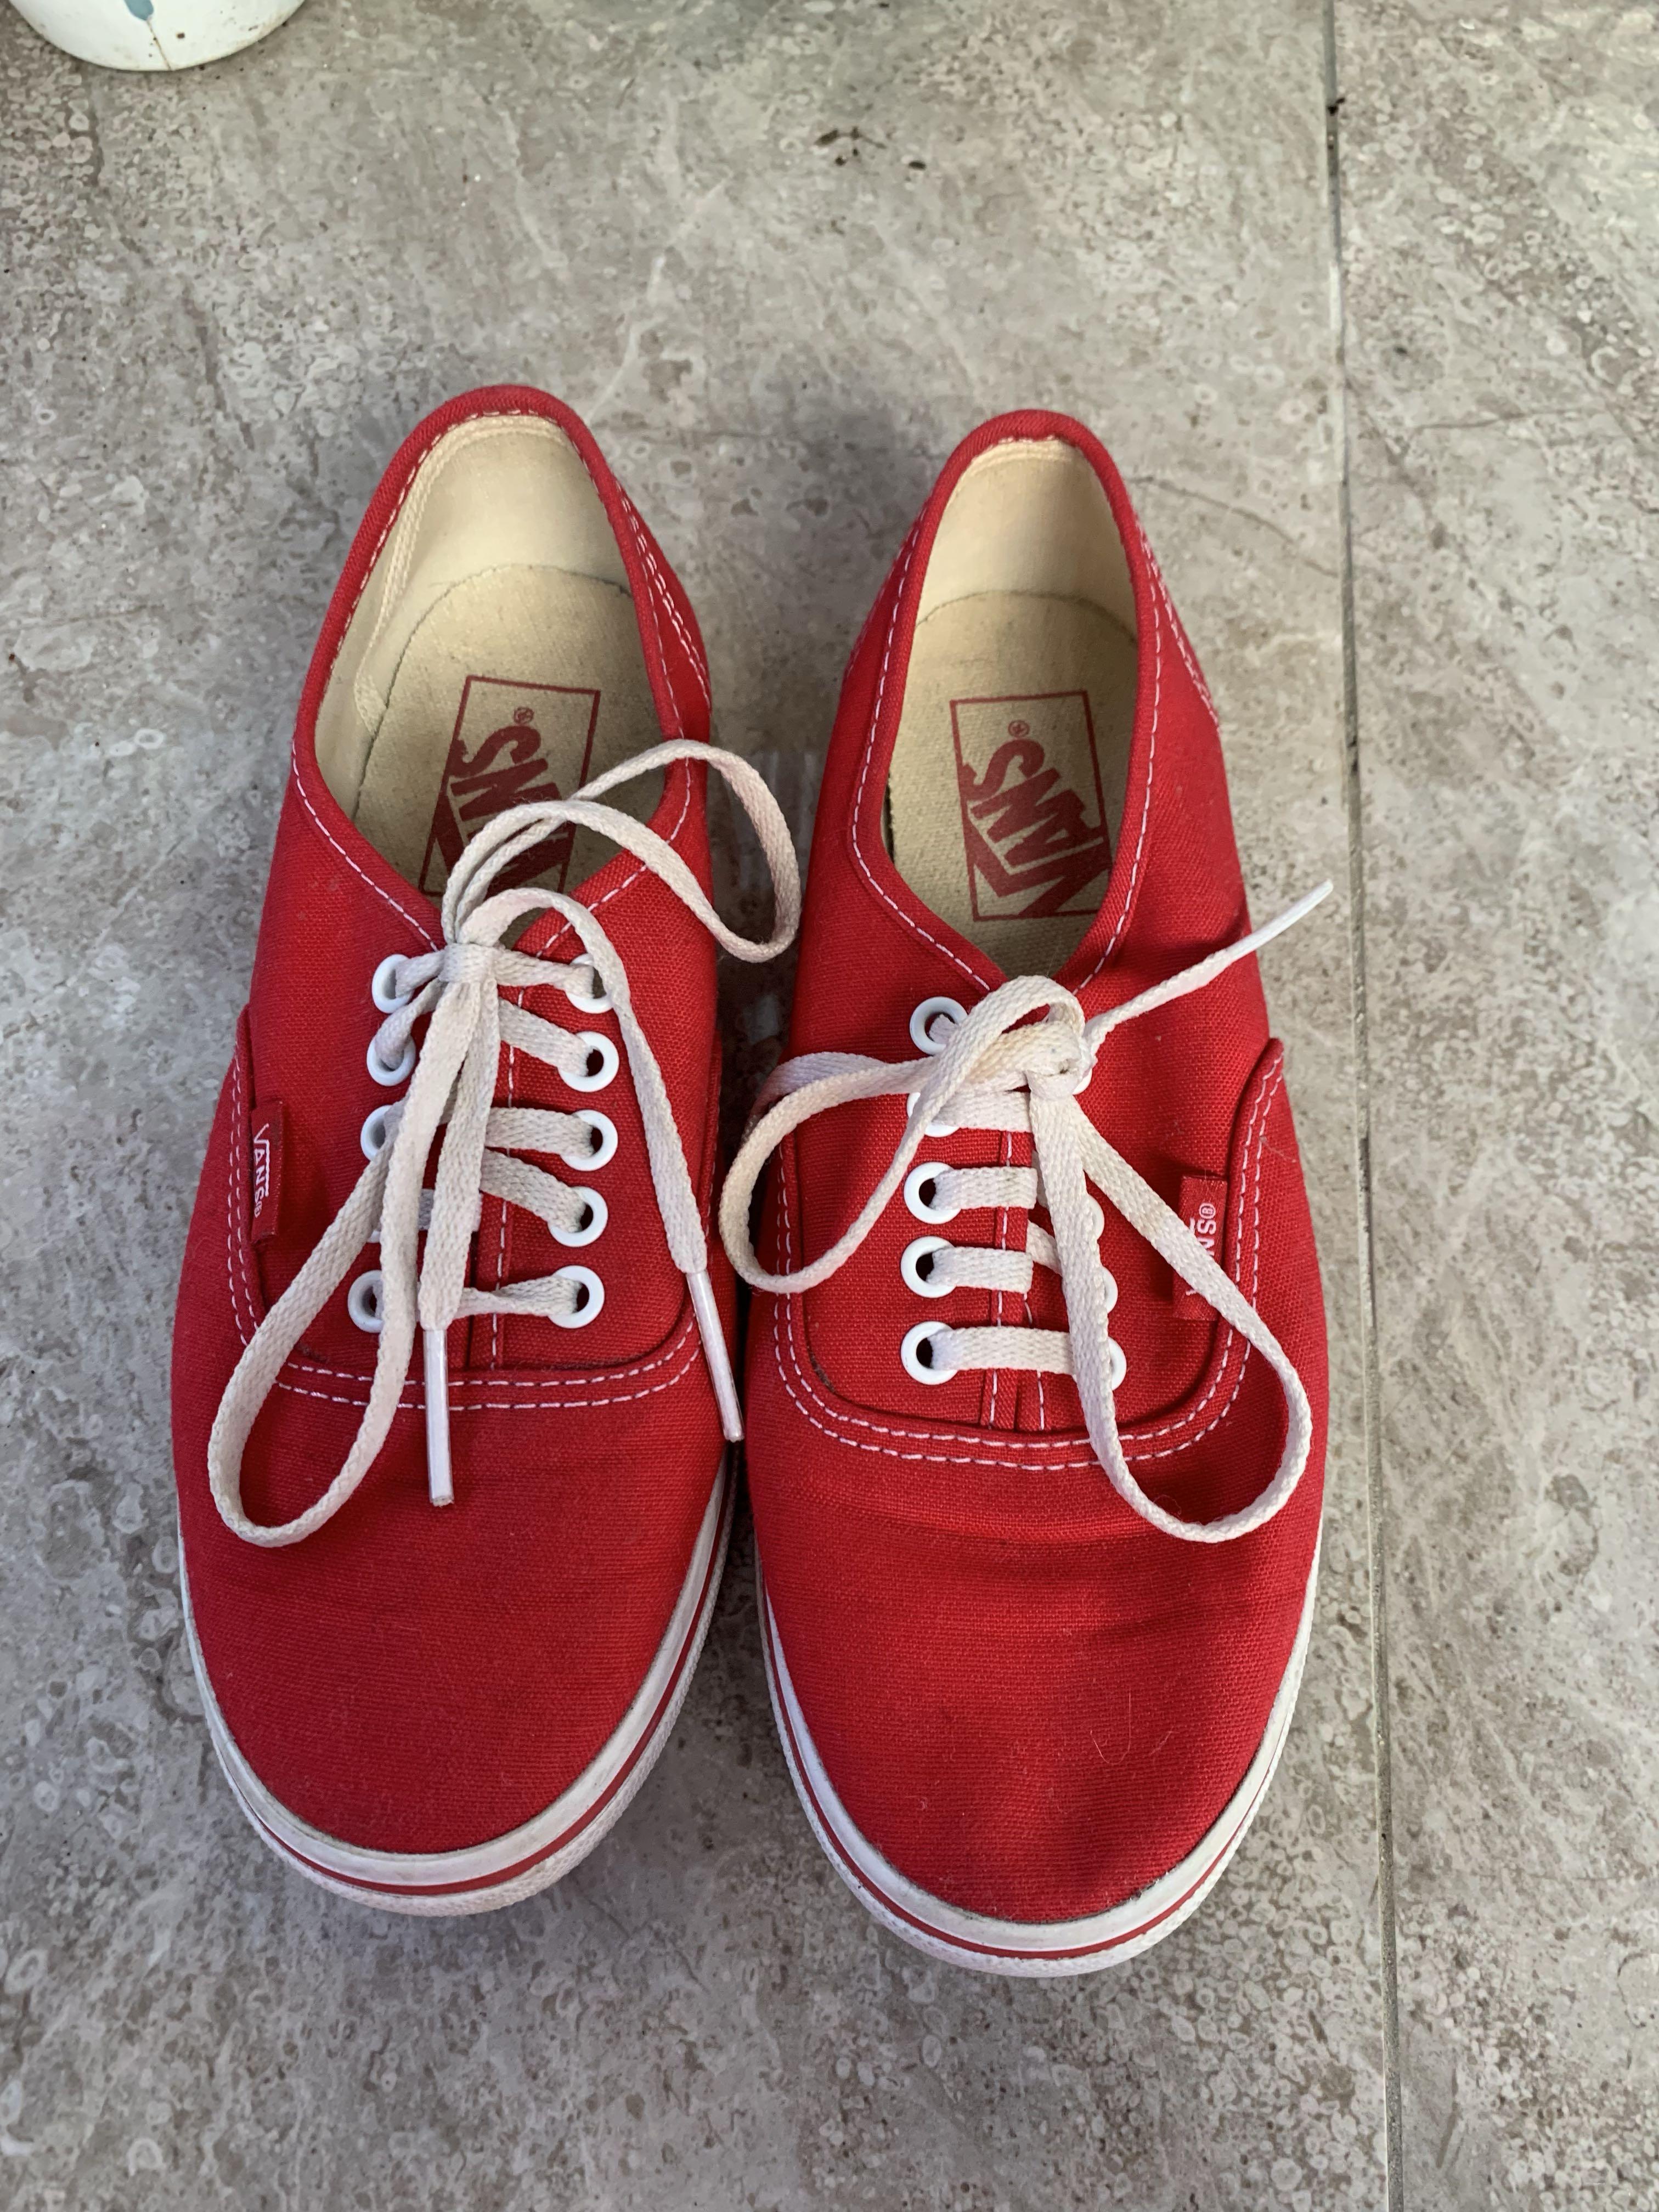 Sale‼️Authentic Red Vans size 5.5 